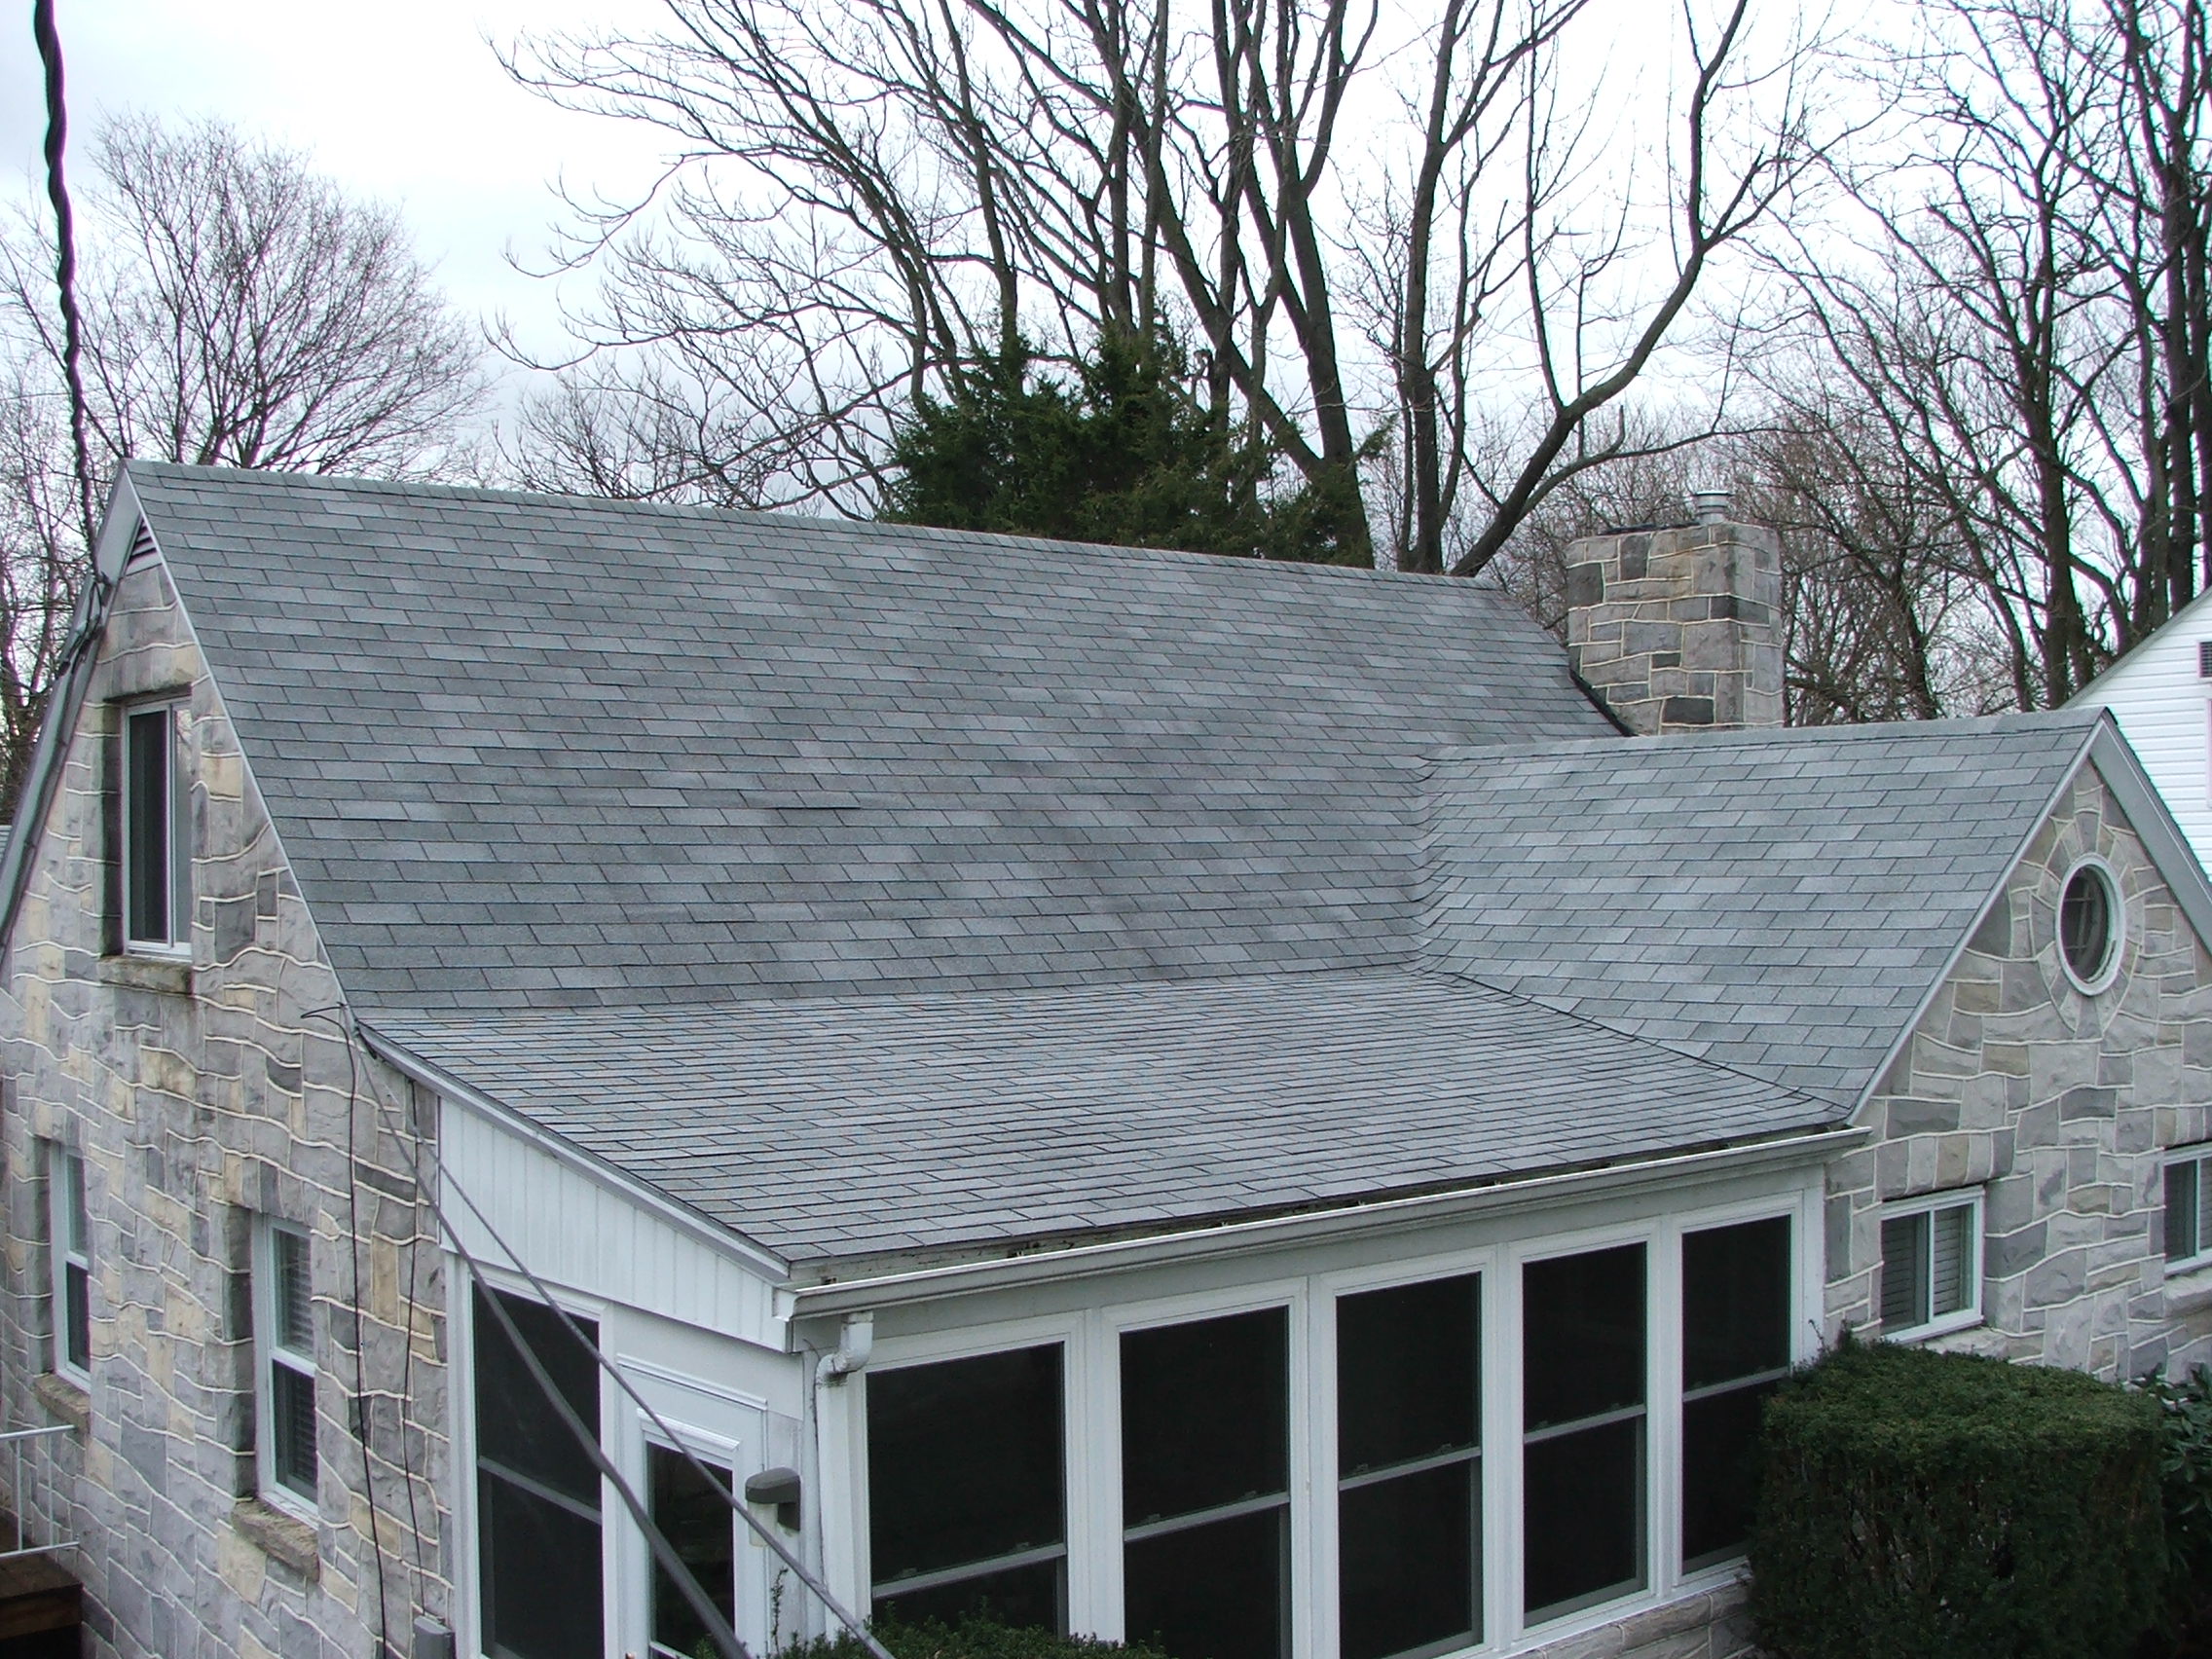 After low pressure washing and cleaning of a house roof in Harrisburg PA